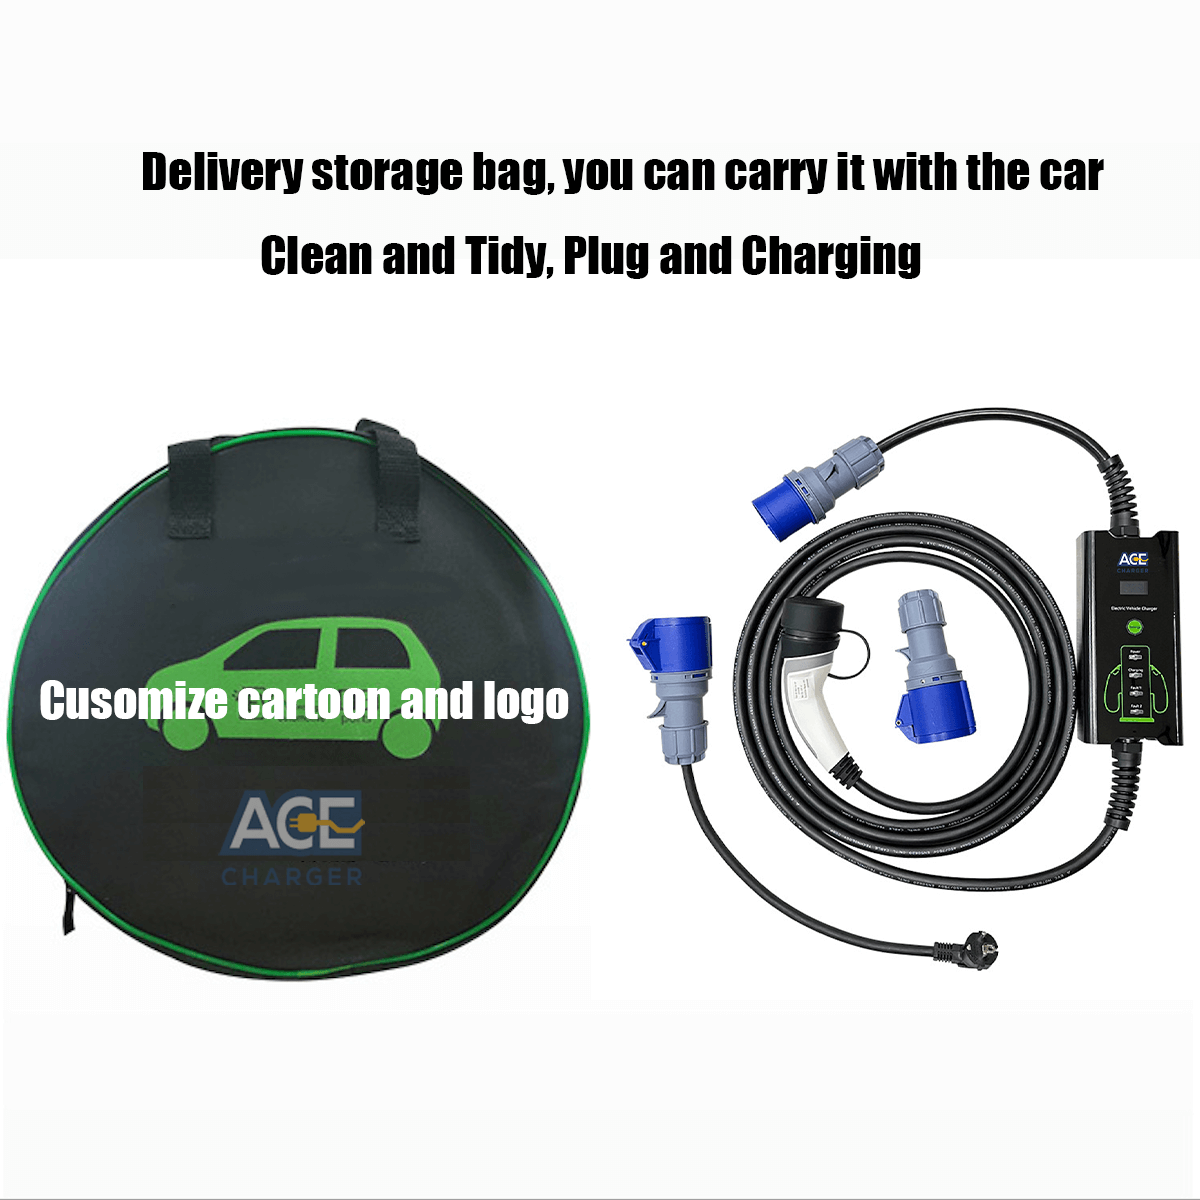 ev portable charger package 3, BEmeleon ACE Portable Ev Charger,Portable 240v Ev Charger,Car Charging Plug,Portable Electric Charger,Portable Hybrid Car Charger,Portable Ev Car Battery Charger,Portable Ev Charger Battery,Electric Car Portable Battery Charger,Portable Car Electric Charger,Level 1 Portable Charger,Portable Hybrid Charger,Portable Level 2 Charger